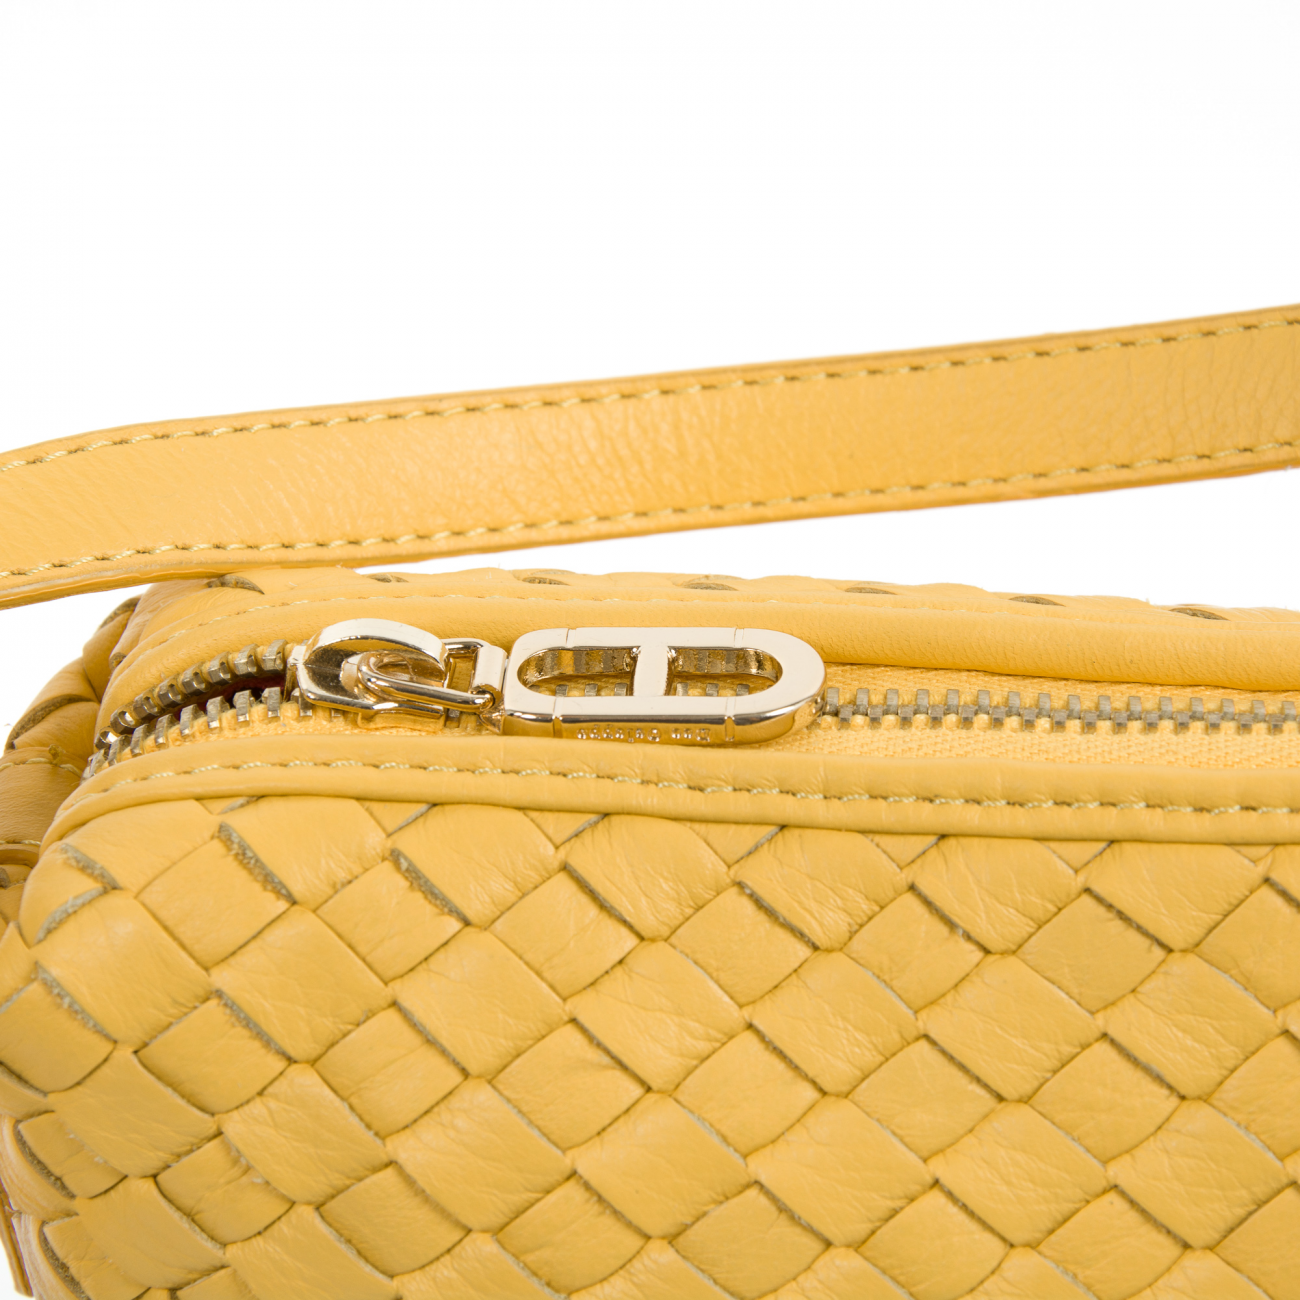 Details: GM1792 INTRECCIO MIAMI MAIS - Color: Yellow - Composition: 100% LEATHER - Made: ITALY - Measures (Width-Height-Depth): 32x22x10 cm - Front Logo - Zip Closure - Logo Inside - One Inside Zip Pocket - Removable Shoulder Strap